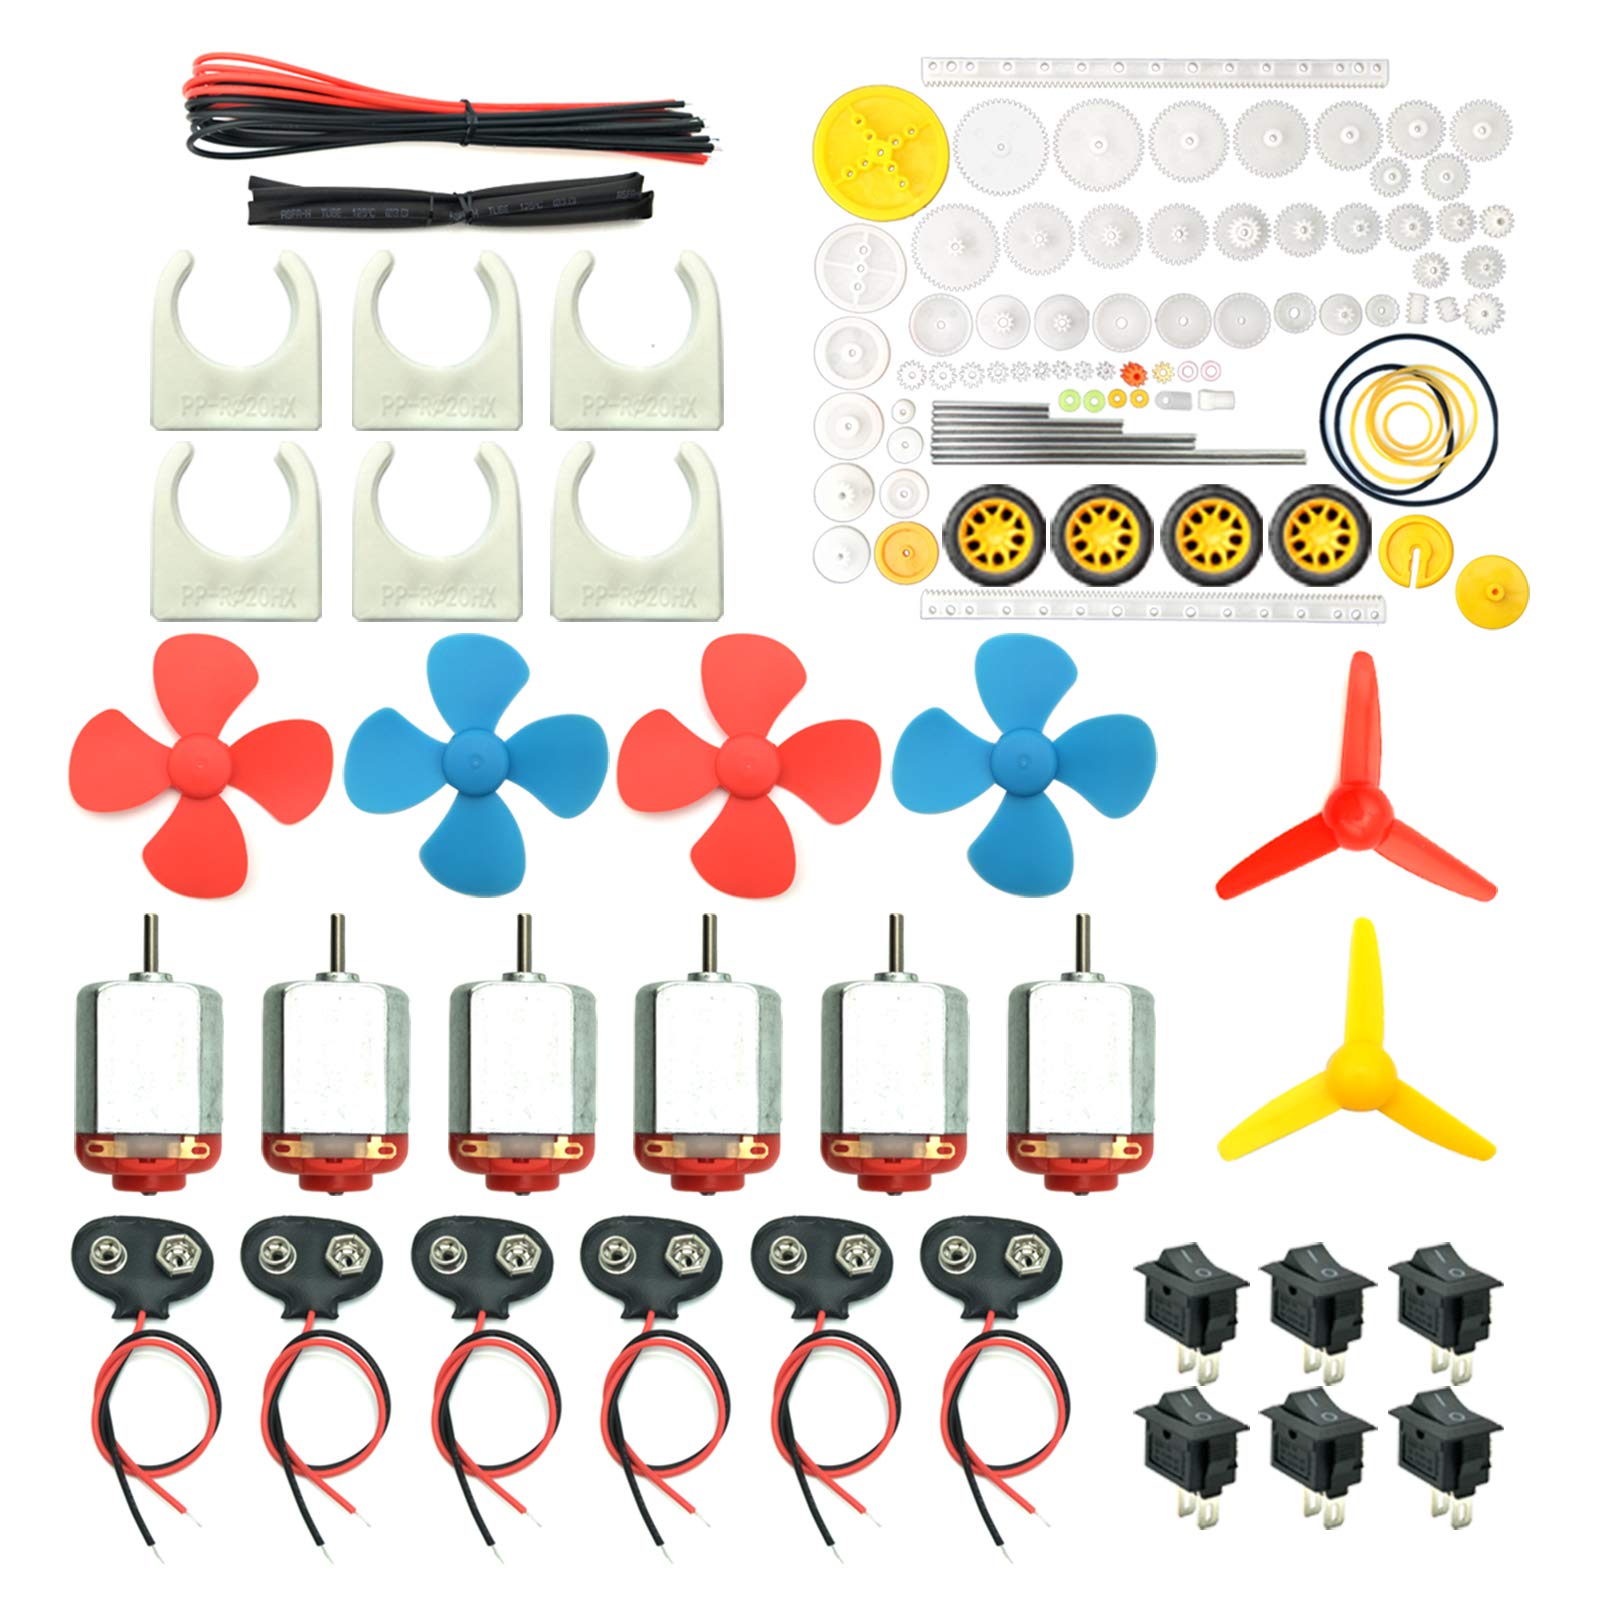 Book Cover 6 Set DC Motors Kit, Mini Electric Hobby Motor 3V -12V 25000 RPM Strong Magnetic with 86Pcs Plastic Gears, 9V Battery Clip Connector,Boat Rocker Switch,Shaft Propeller for DIY Science Projects